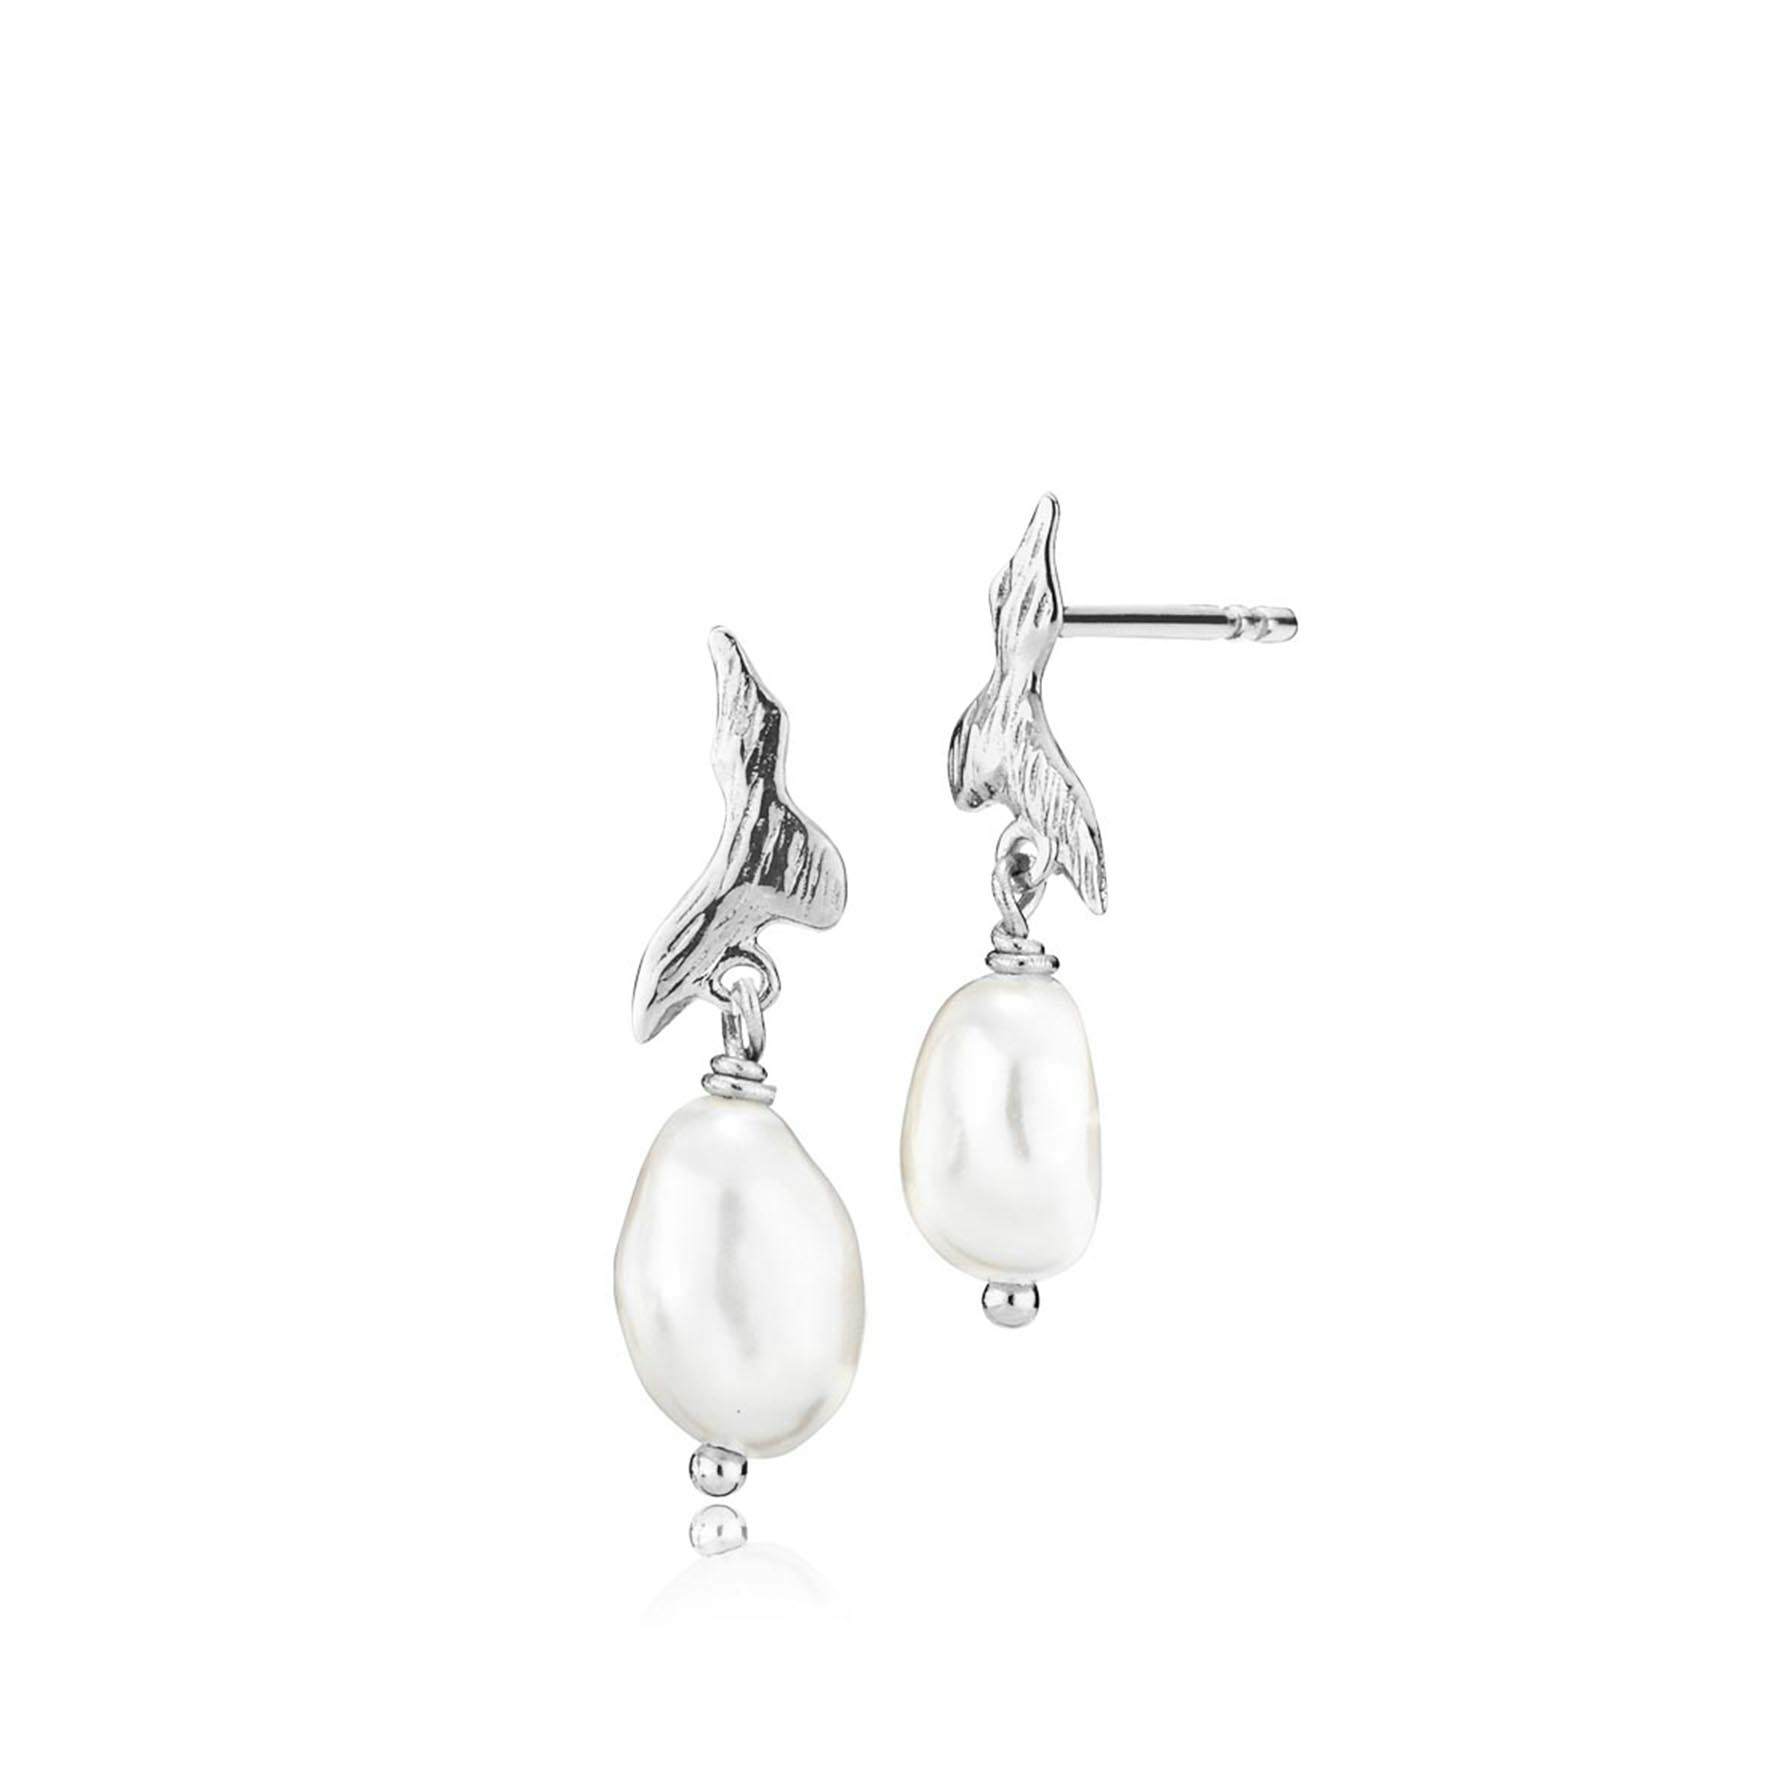 Fairy Earrings With Pearl från Izabel Camille i Silver Sterling 925